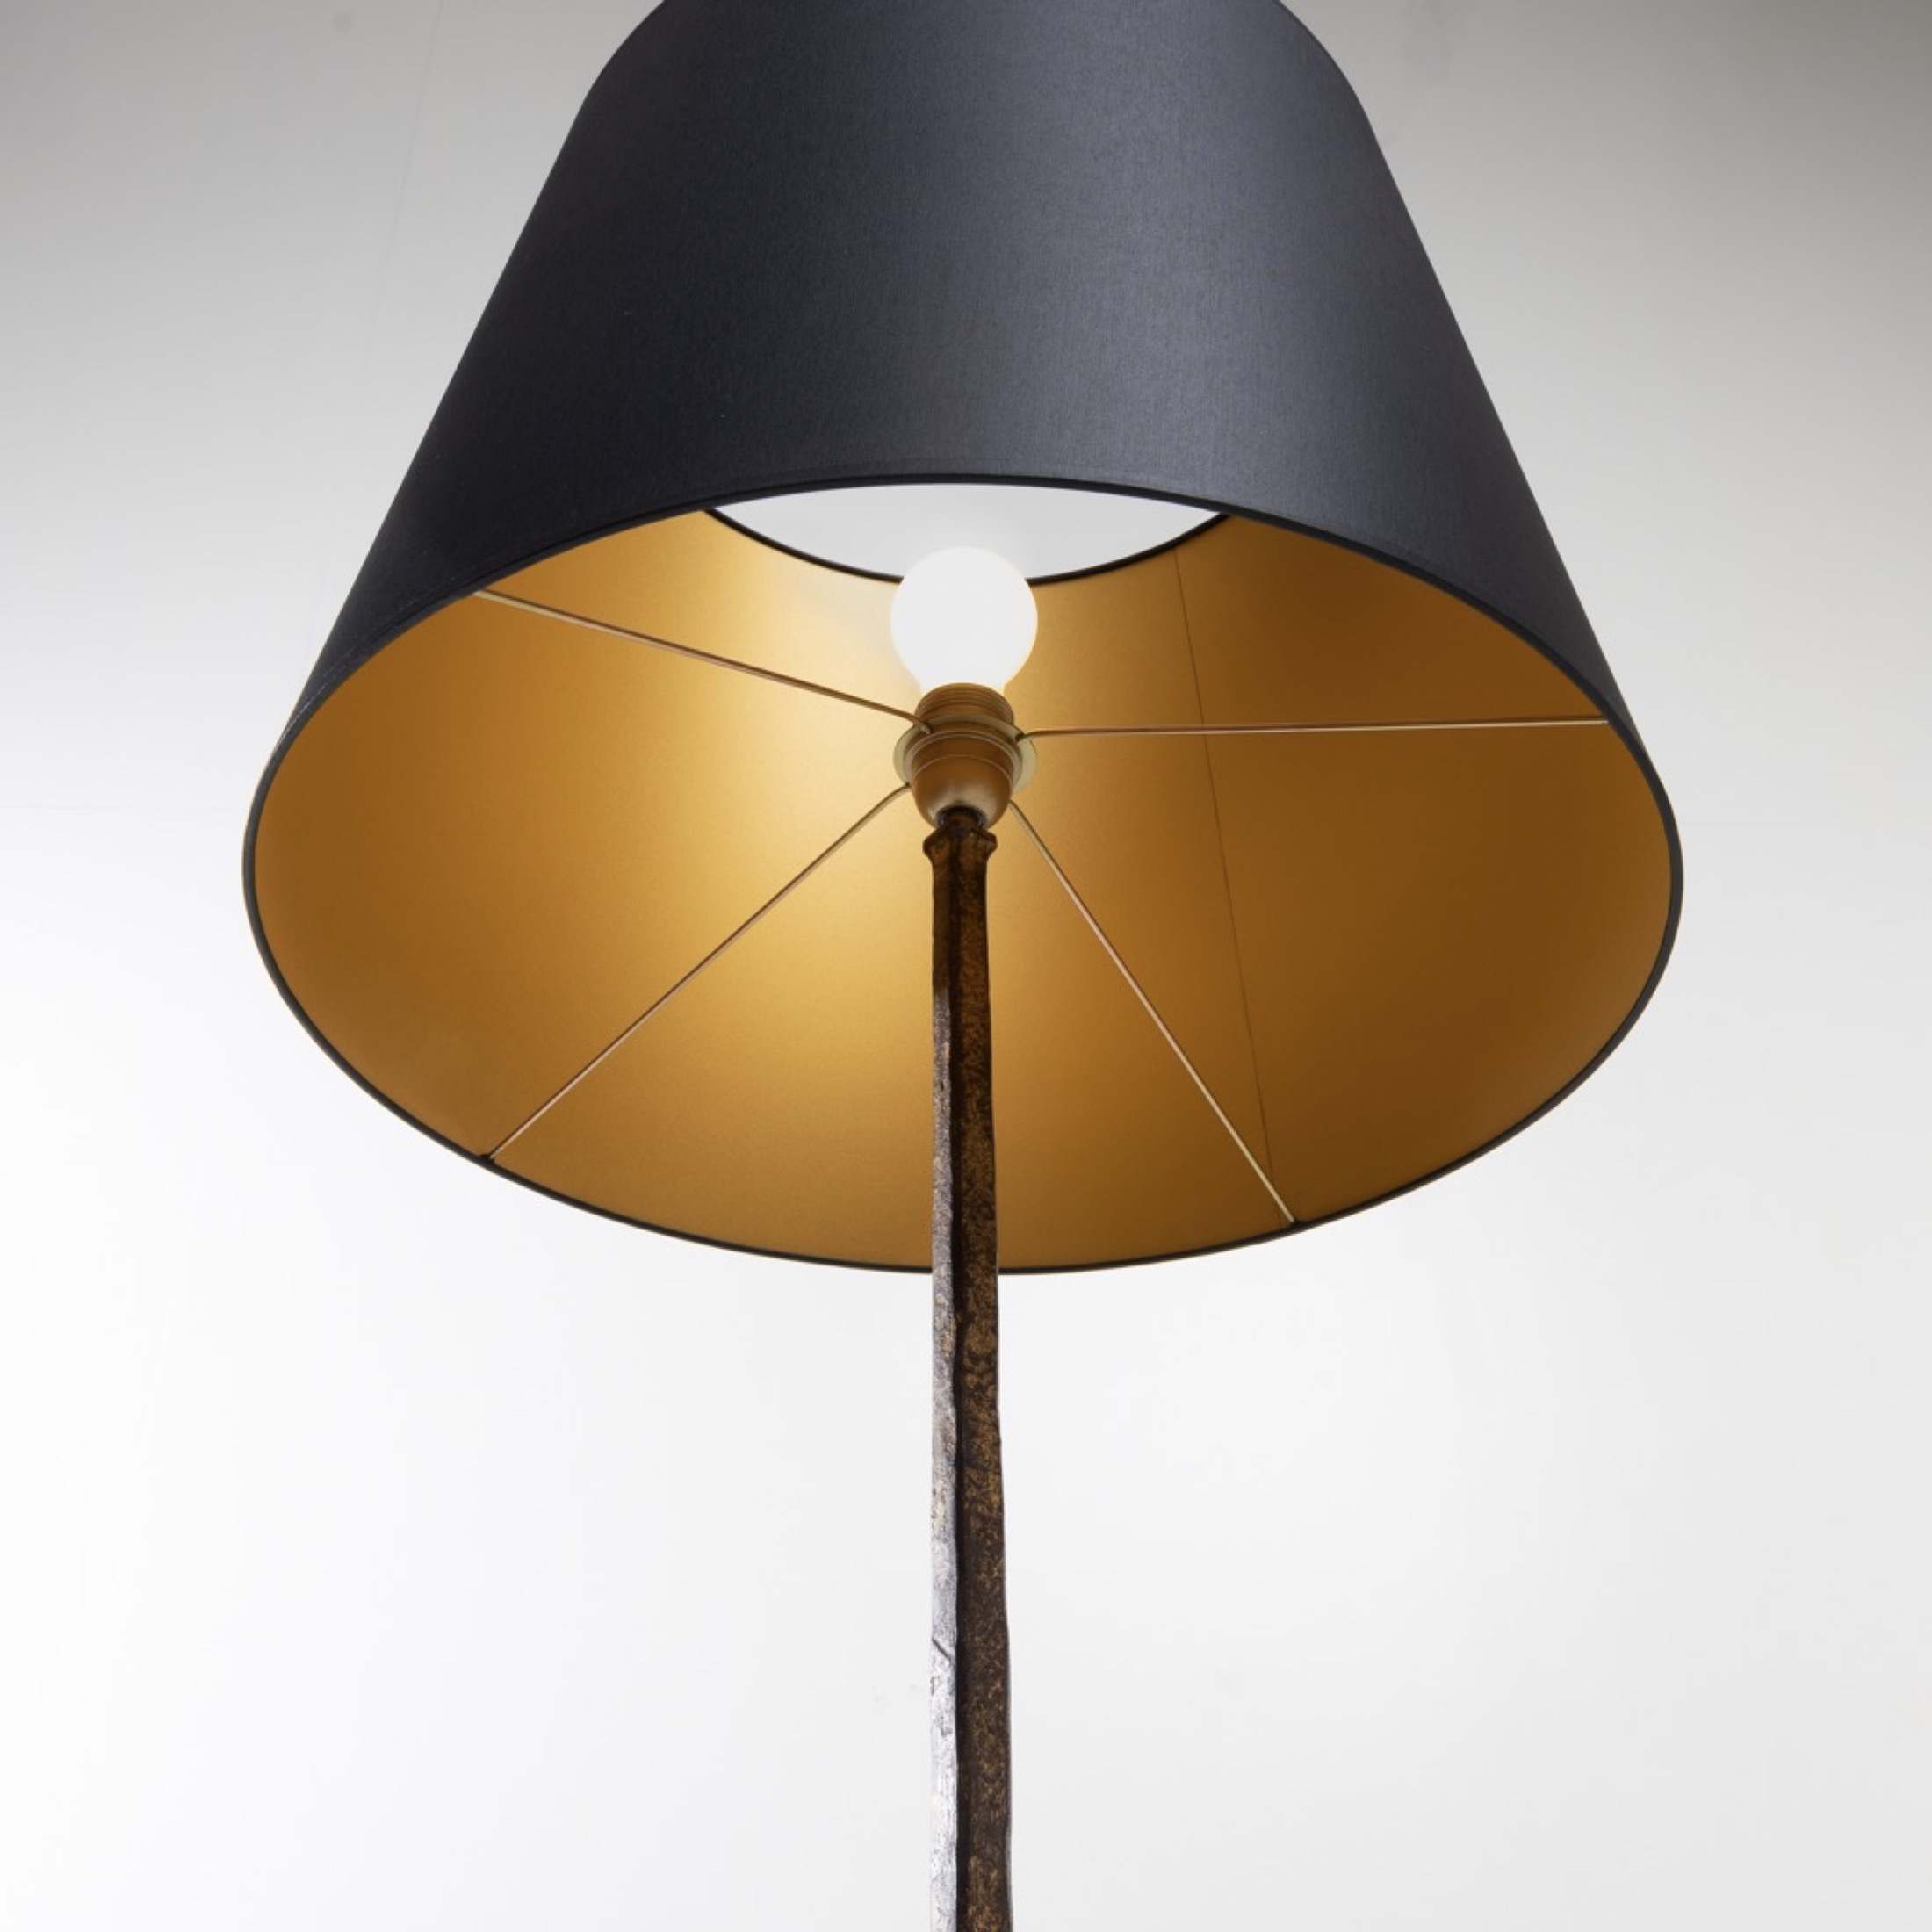 Pair of floor Lamps by Maison Ramsay 